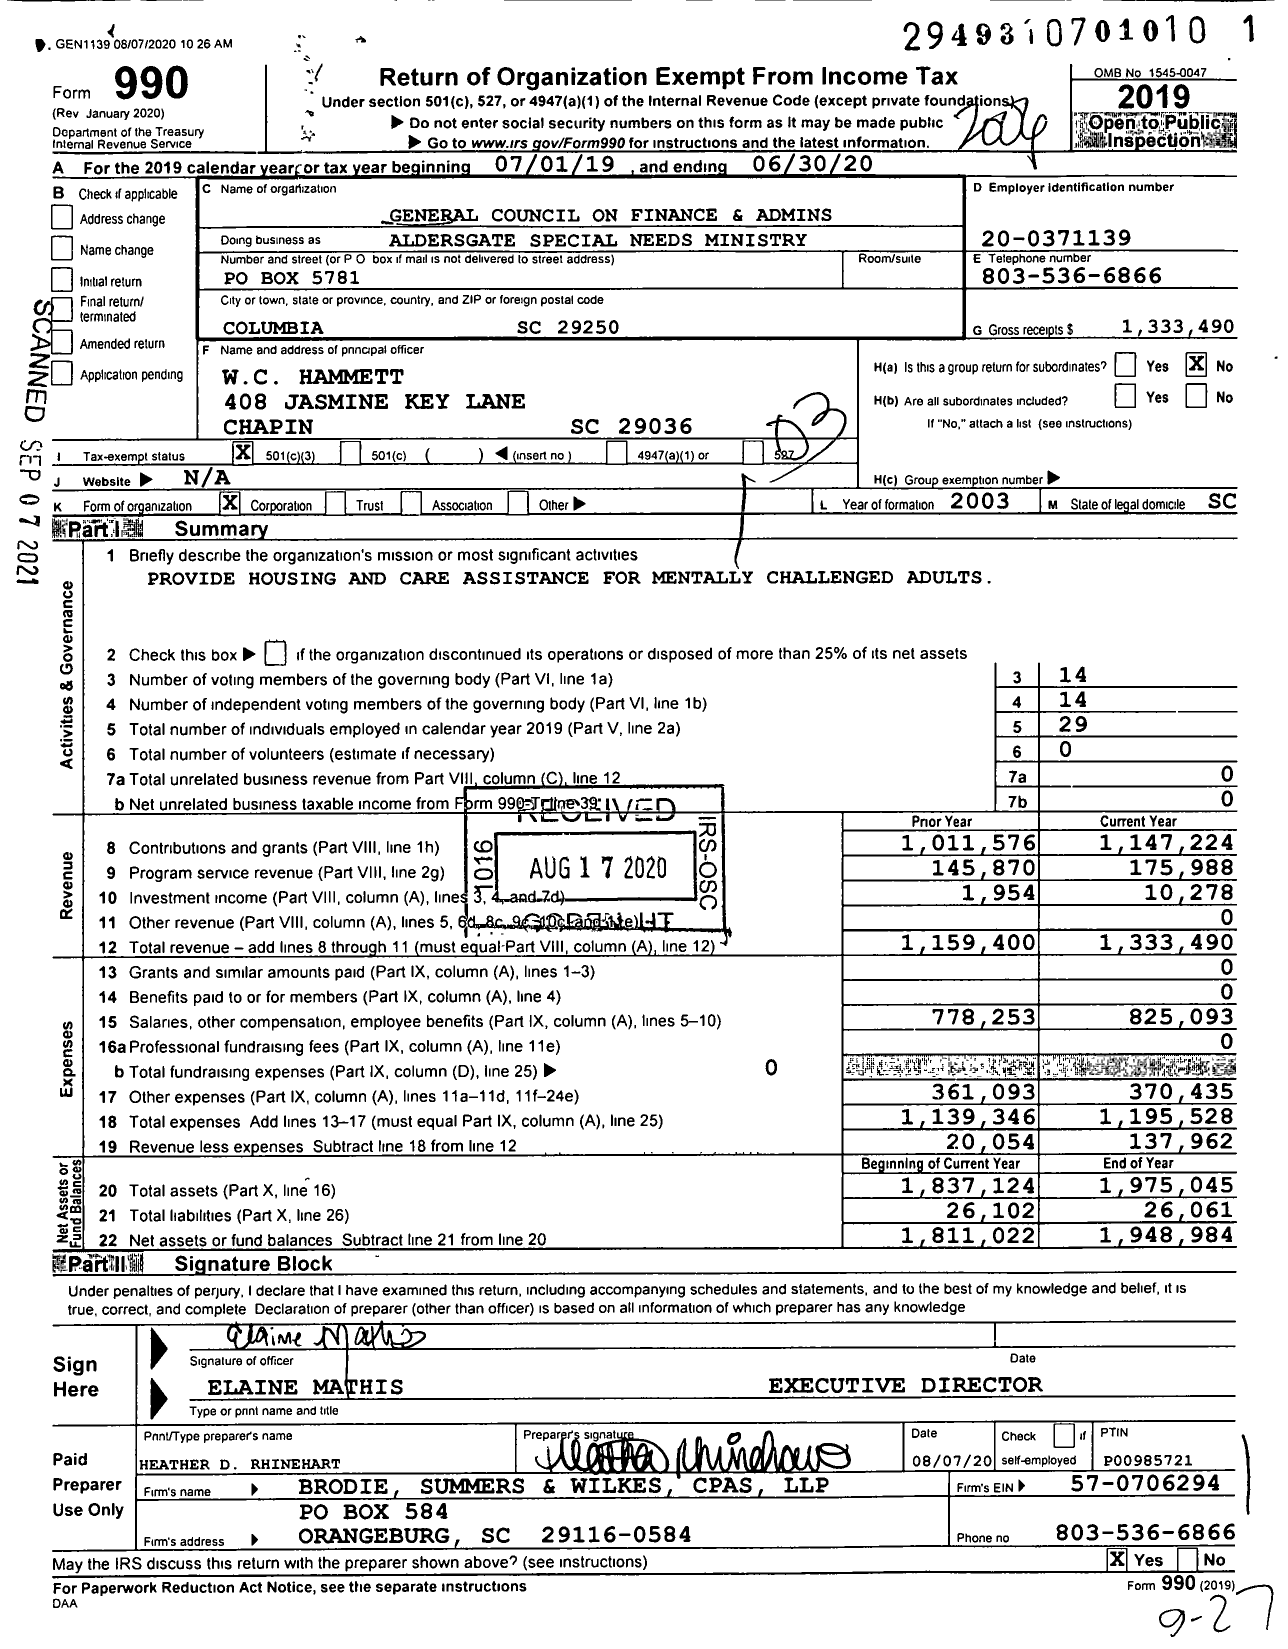 Image of first page of 2019 Form 990 for General Council on Finance and Admins Aldersgate Special Needs Ministry